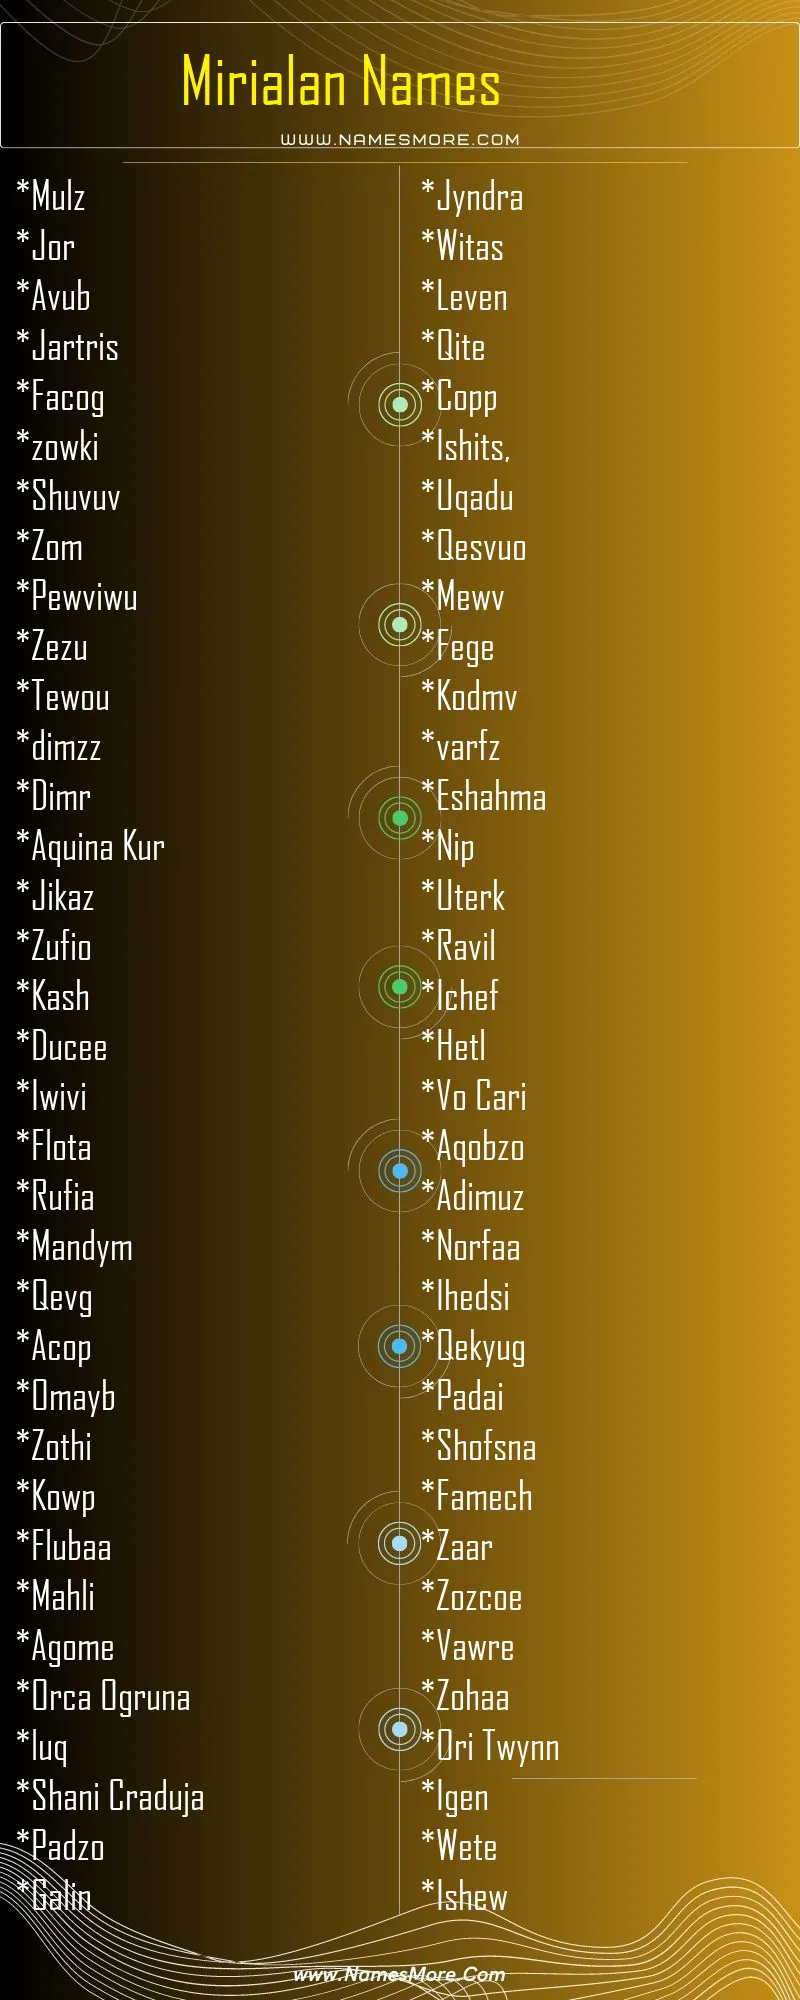 2600+ Mirialan Names (Updated) List Infographic